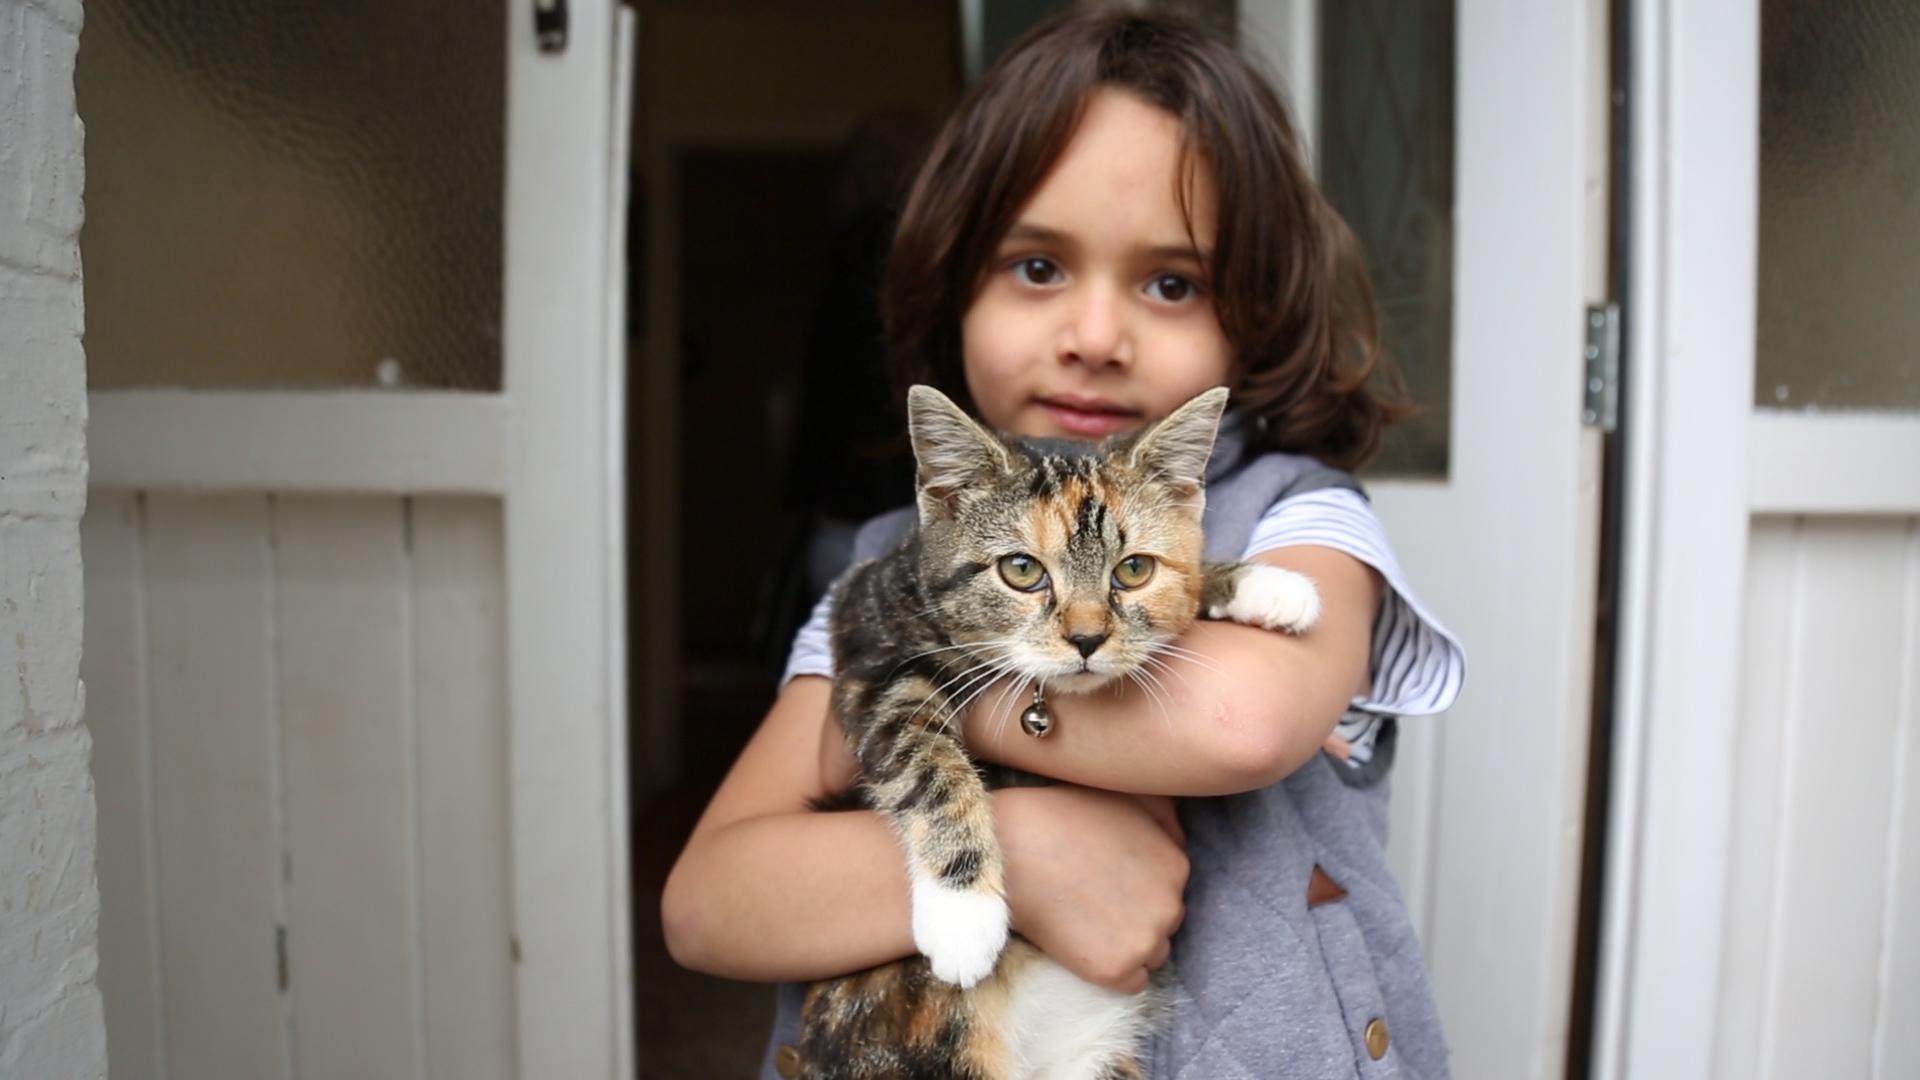 Seven-year-old Yazan and the family cat